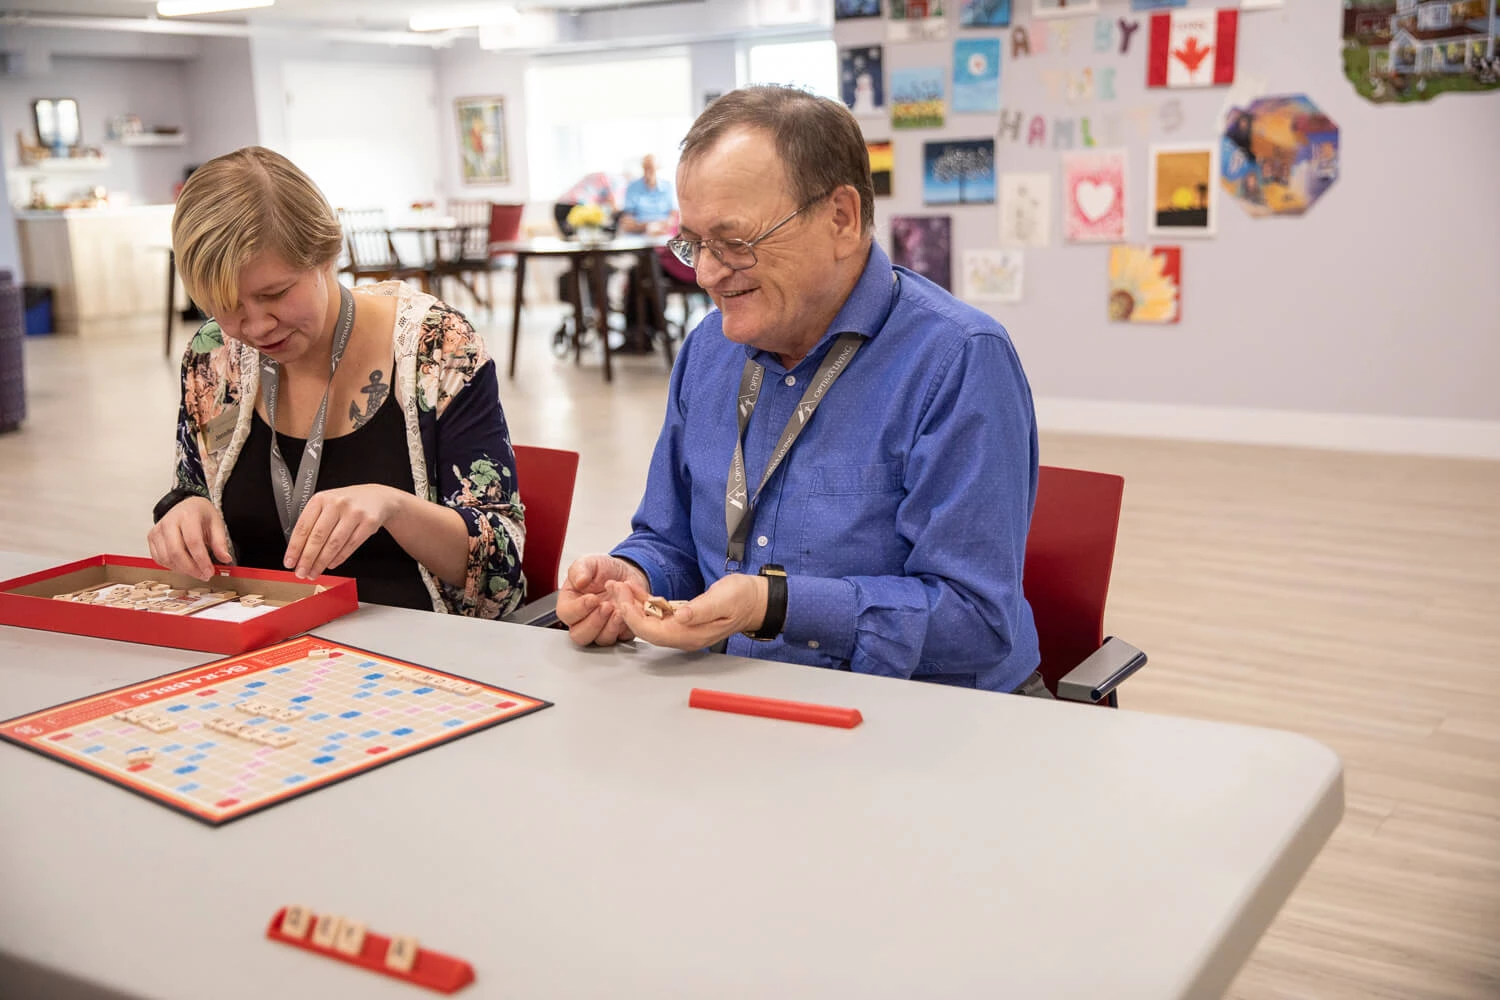 Two people sitting at a table playing a game of scrabble.